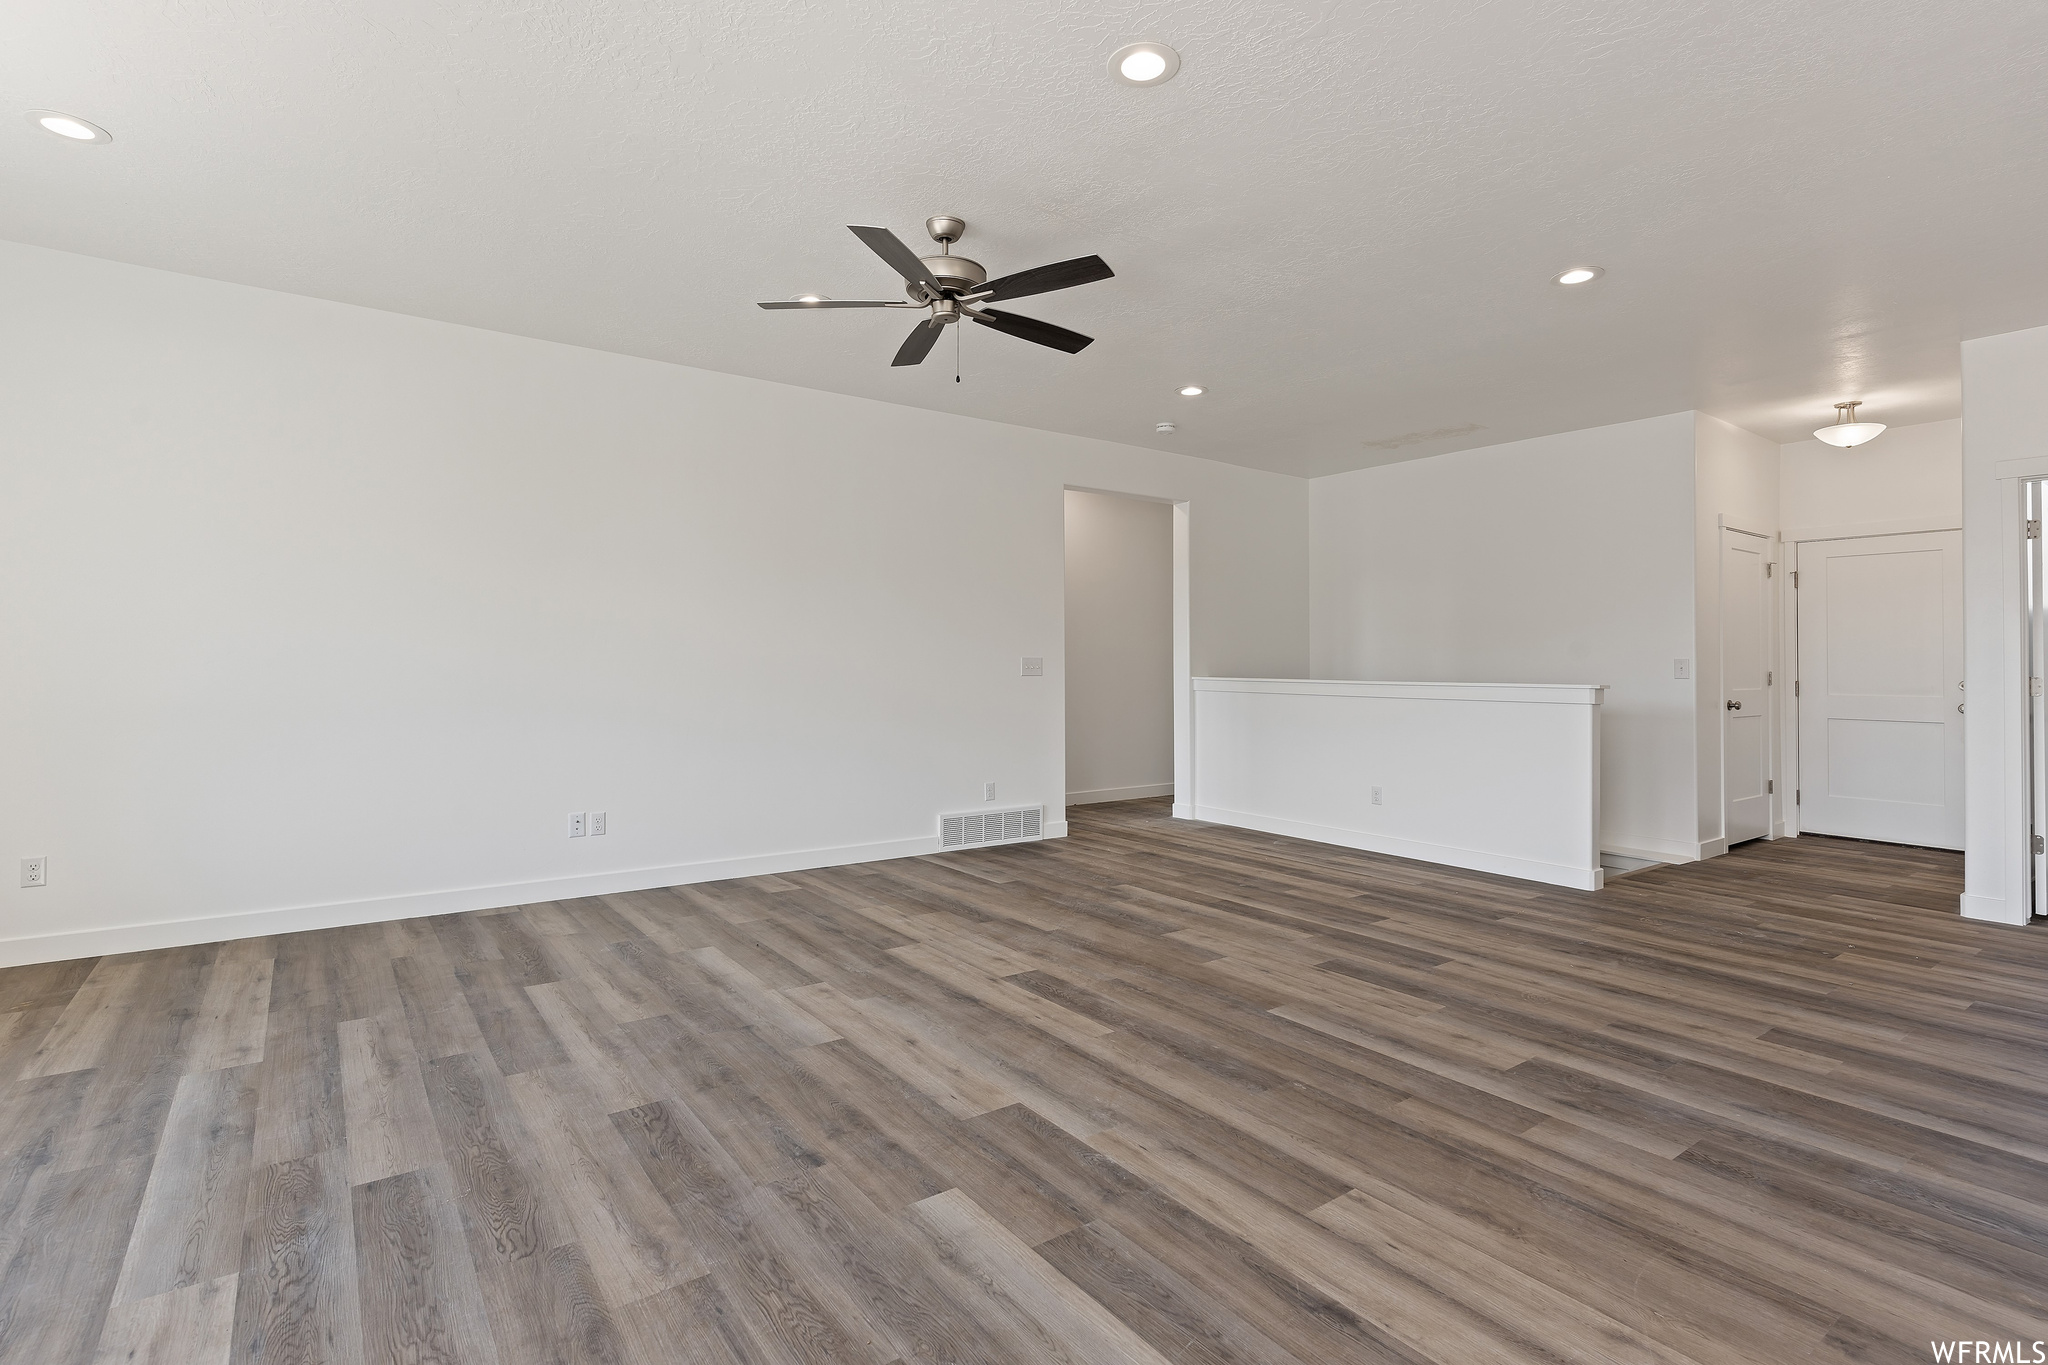 Unfurnished room featuring ceiling fan and light hardwood flooring